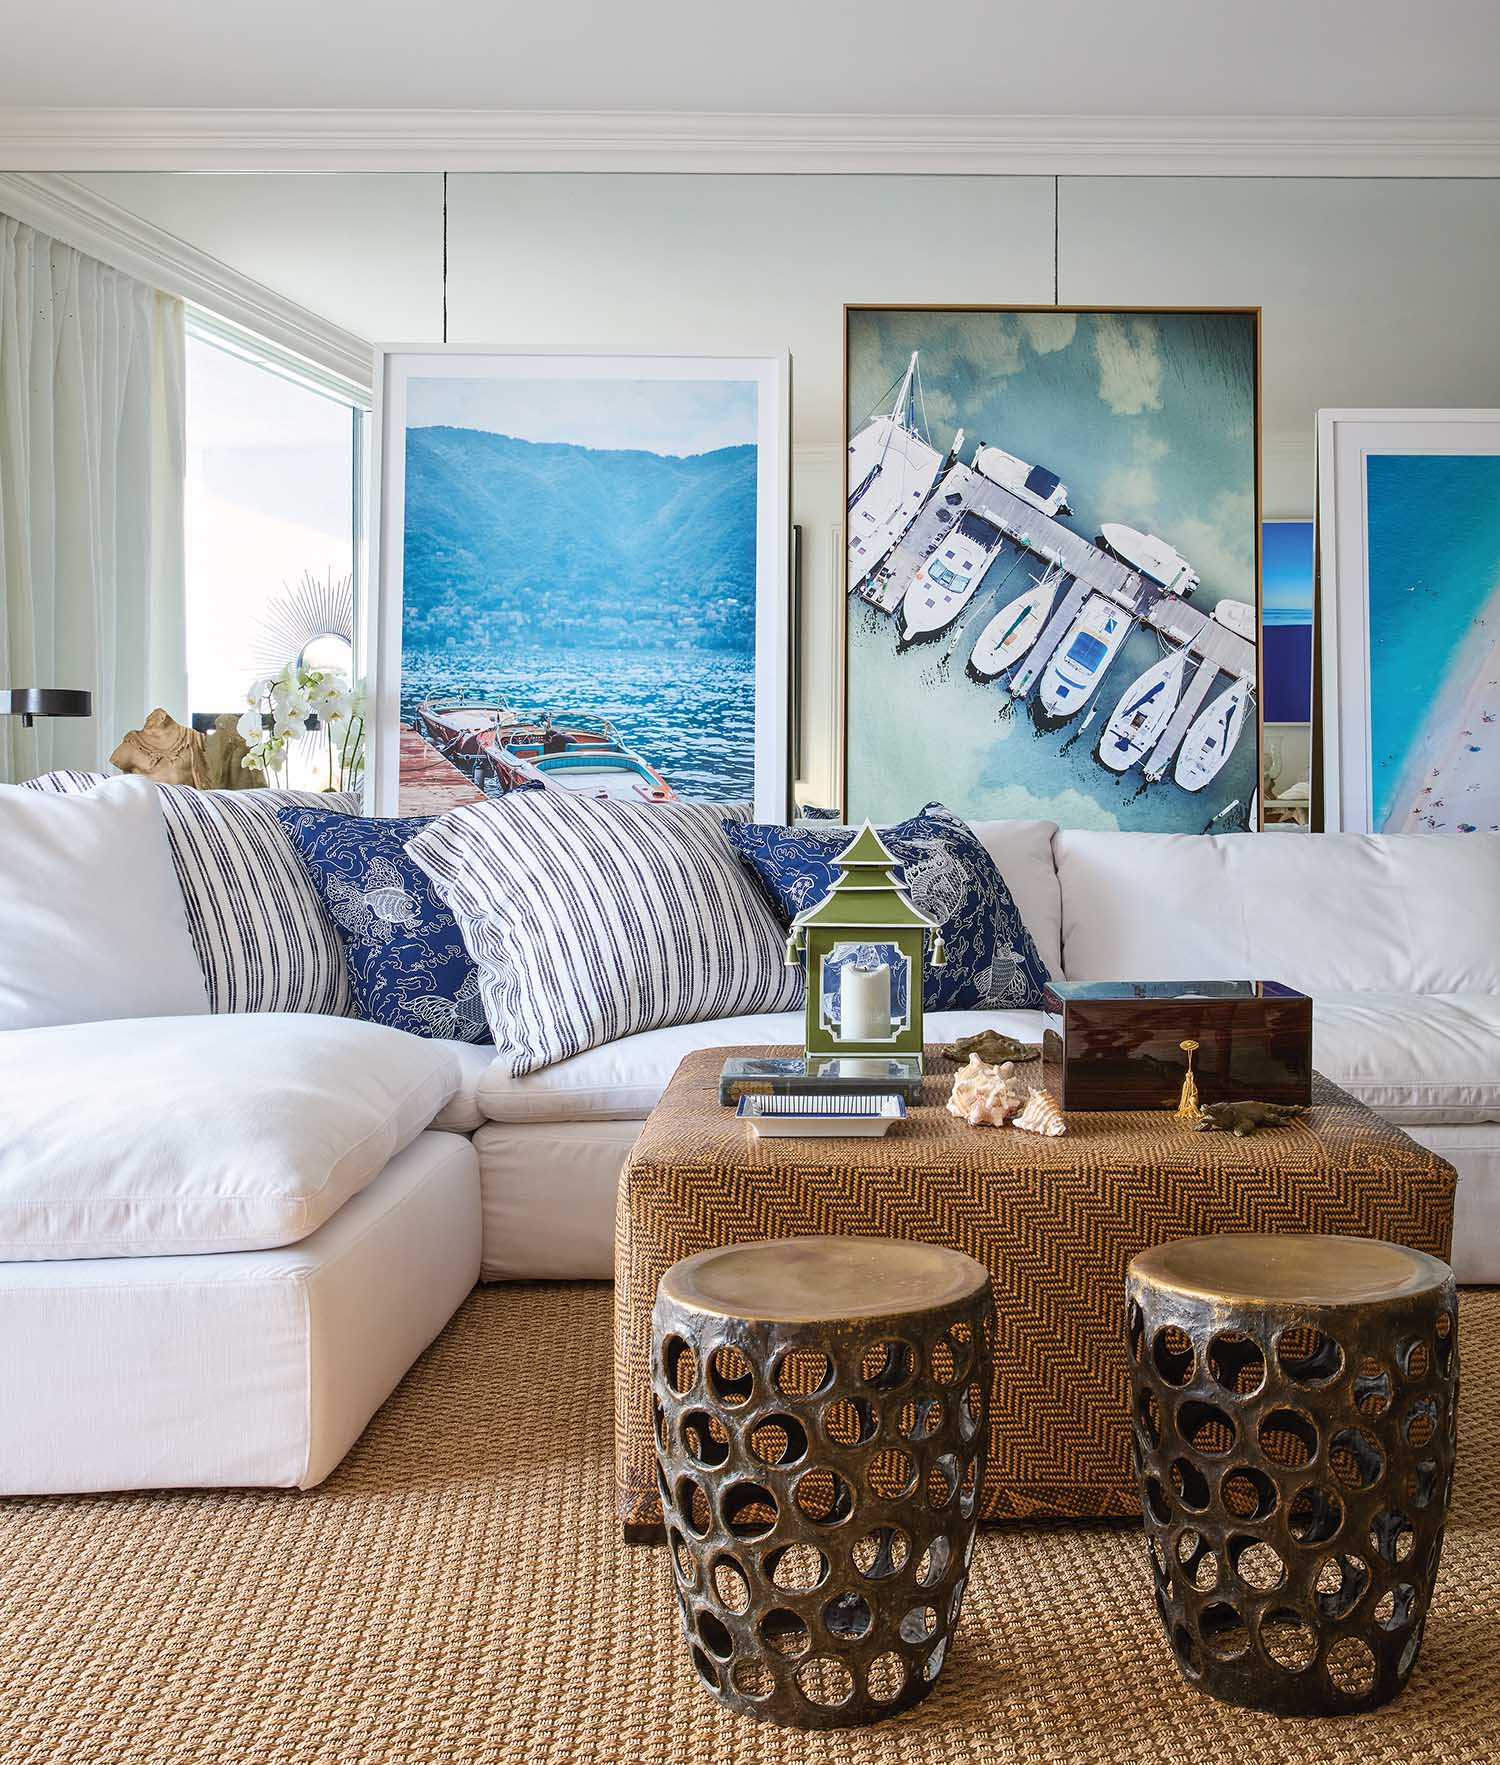 White sectional sofa with blue and white throw pillows and bronze stools. Boat and beach photos on the wall.